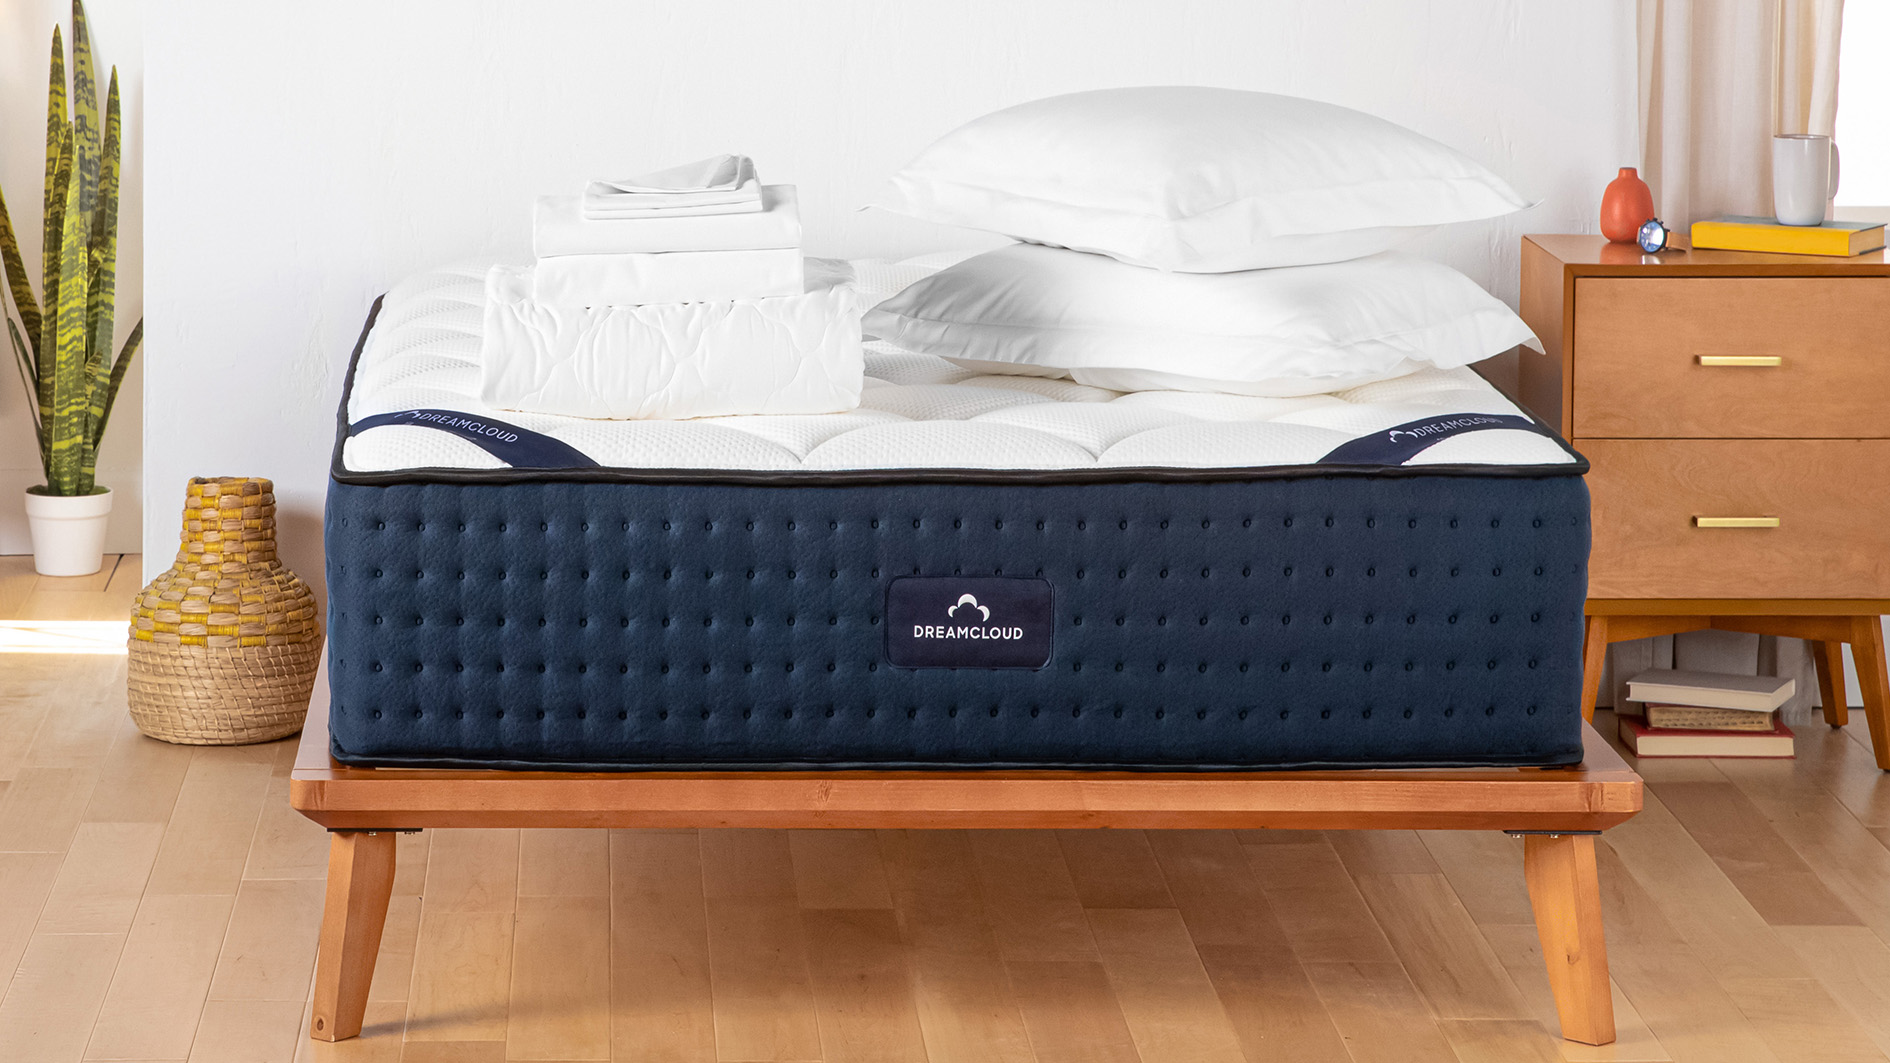 The DreamCloud Mattress on a wooden bed frame in a white bedroom